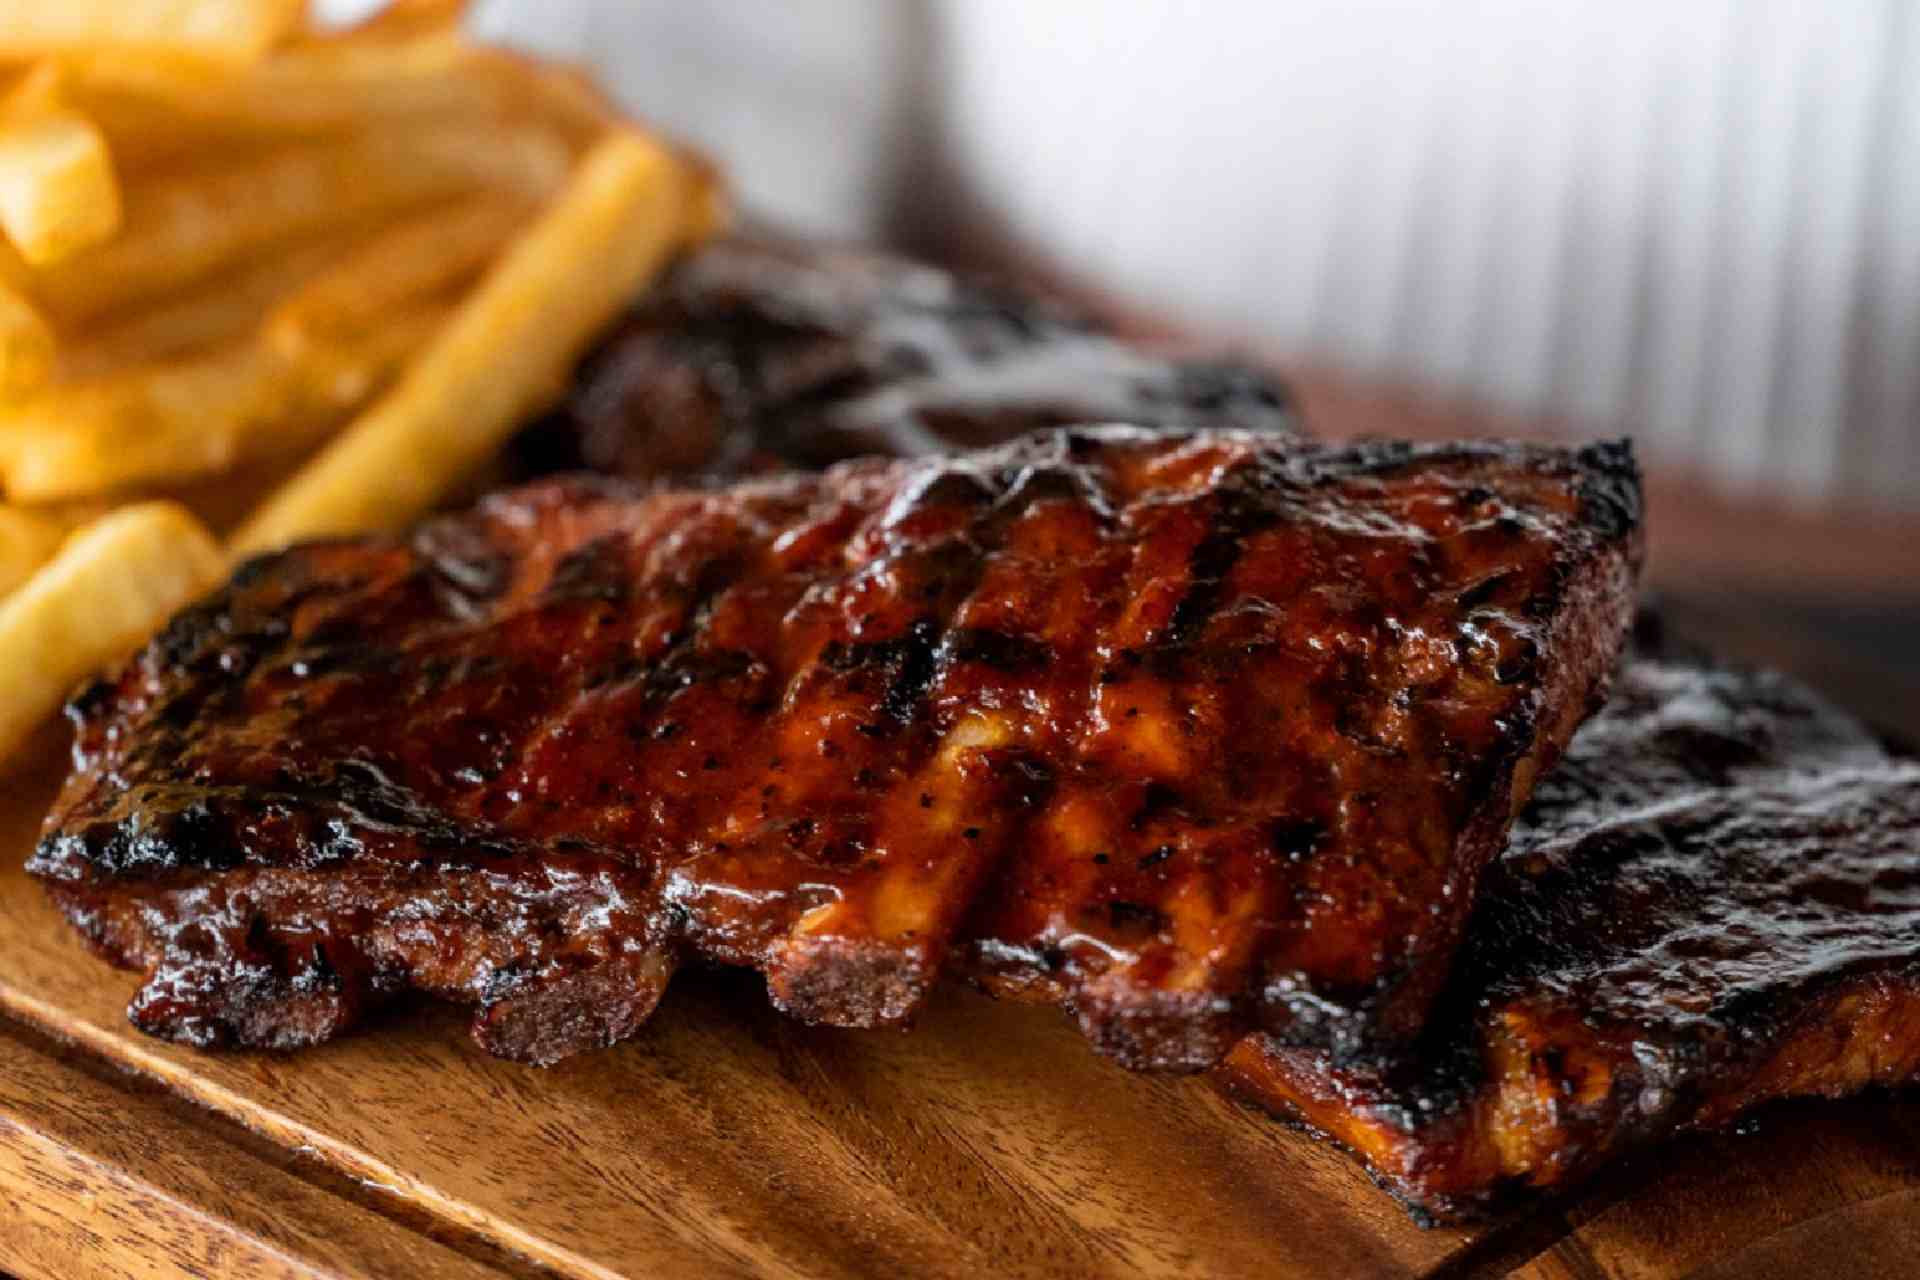 10 Best Restaurants for Cheap Eats in Rhodes - Ribs and Burgers